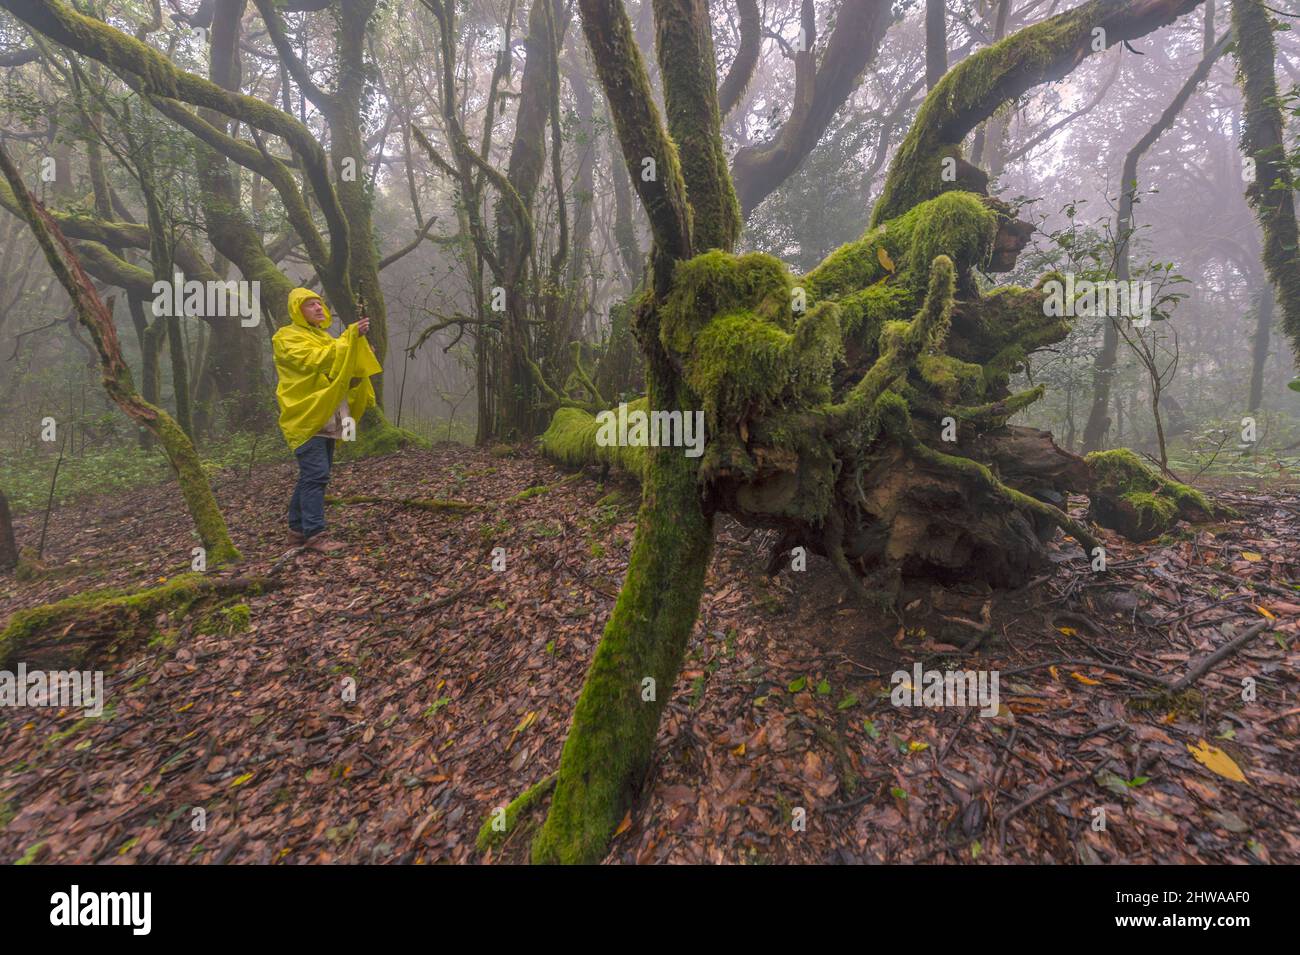 Hiker at the laurel forest in the Garajonay National Park, Canary Islands, La Gomera, Garajonay National Park Stock Photo